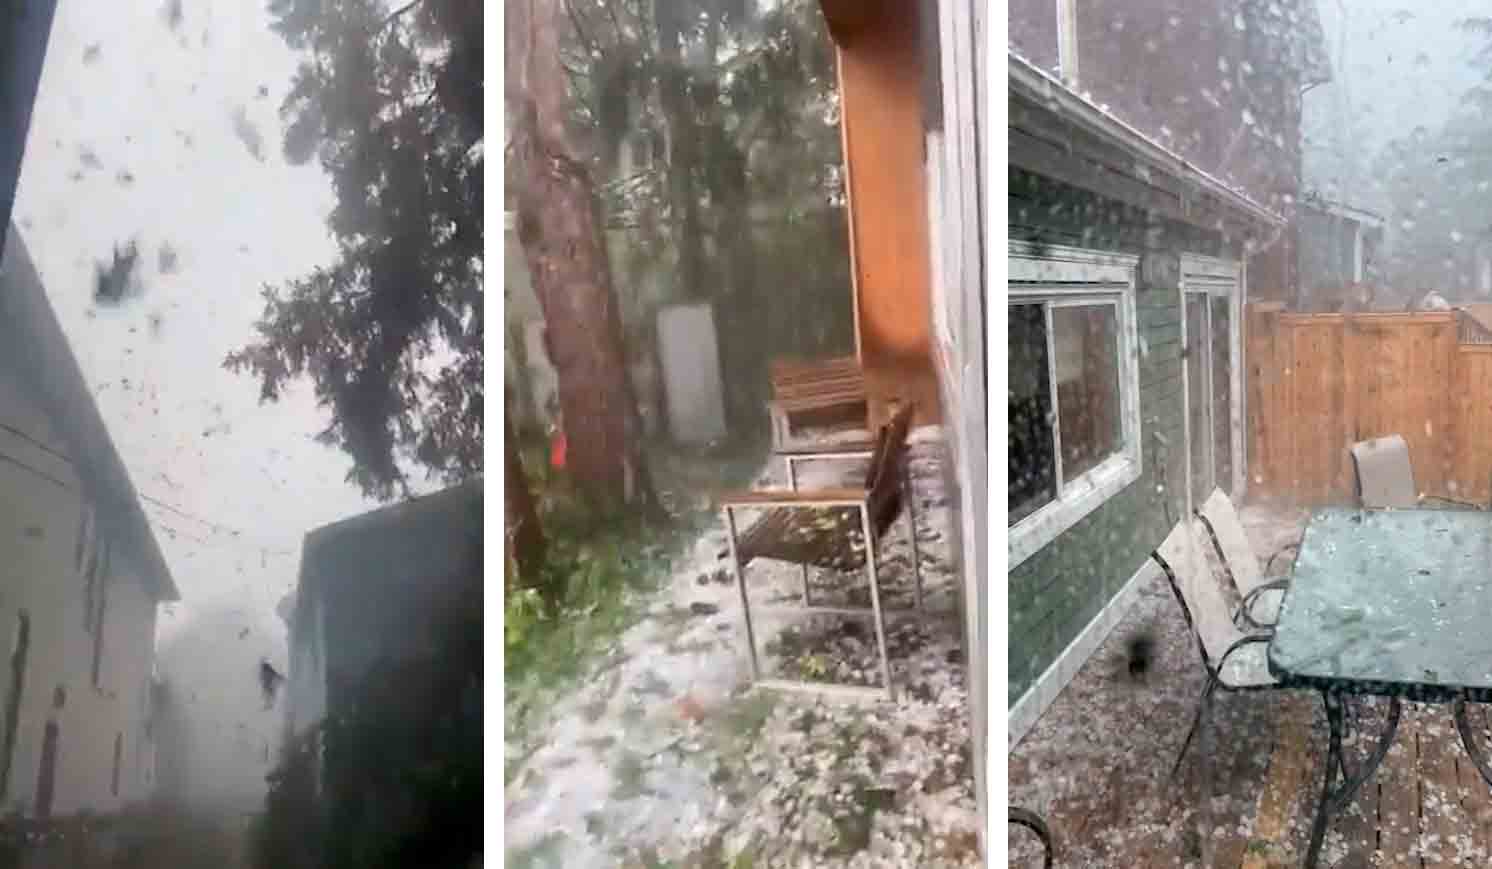 Video: Hailstorm leaves over 10,000 people without power in Canada. Reproduction Twitter @Top_Disaster